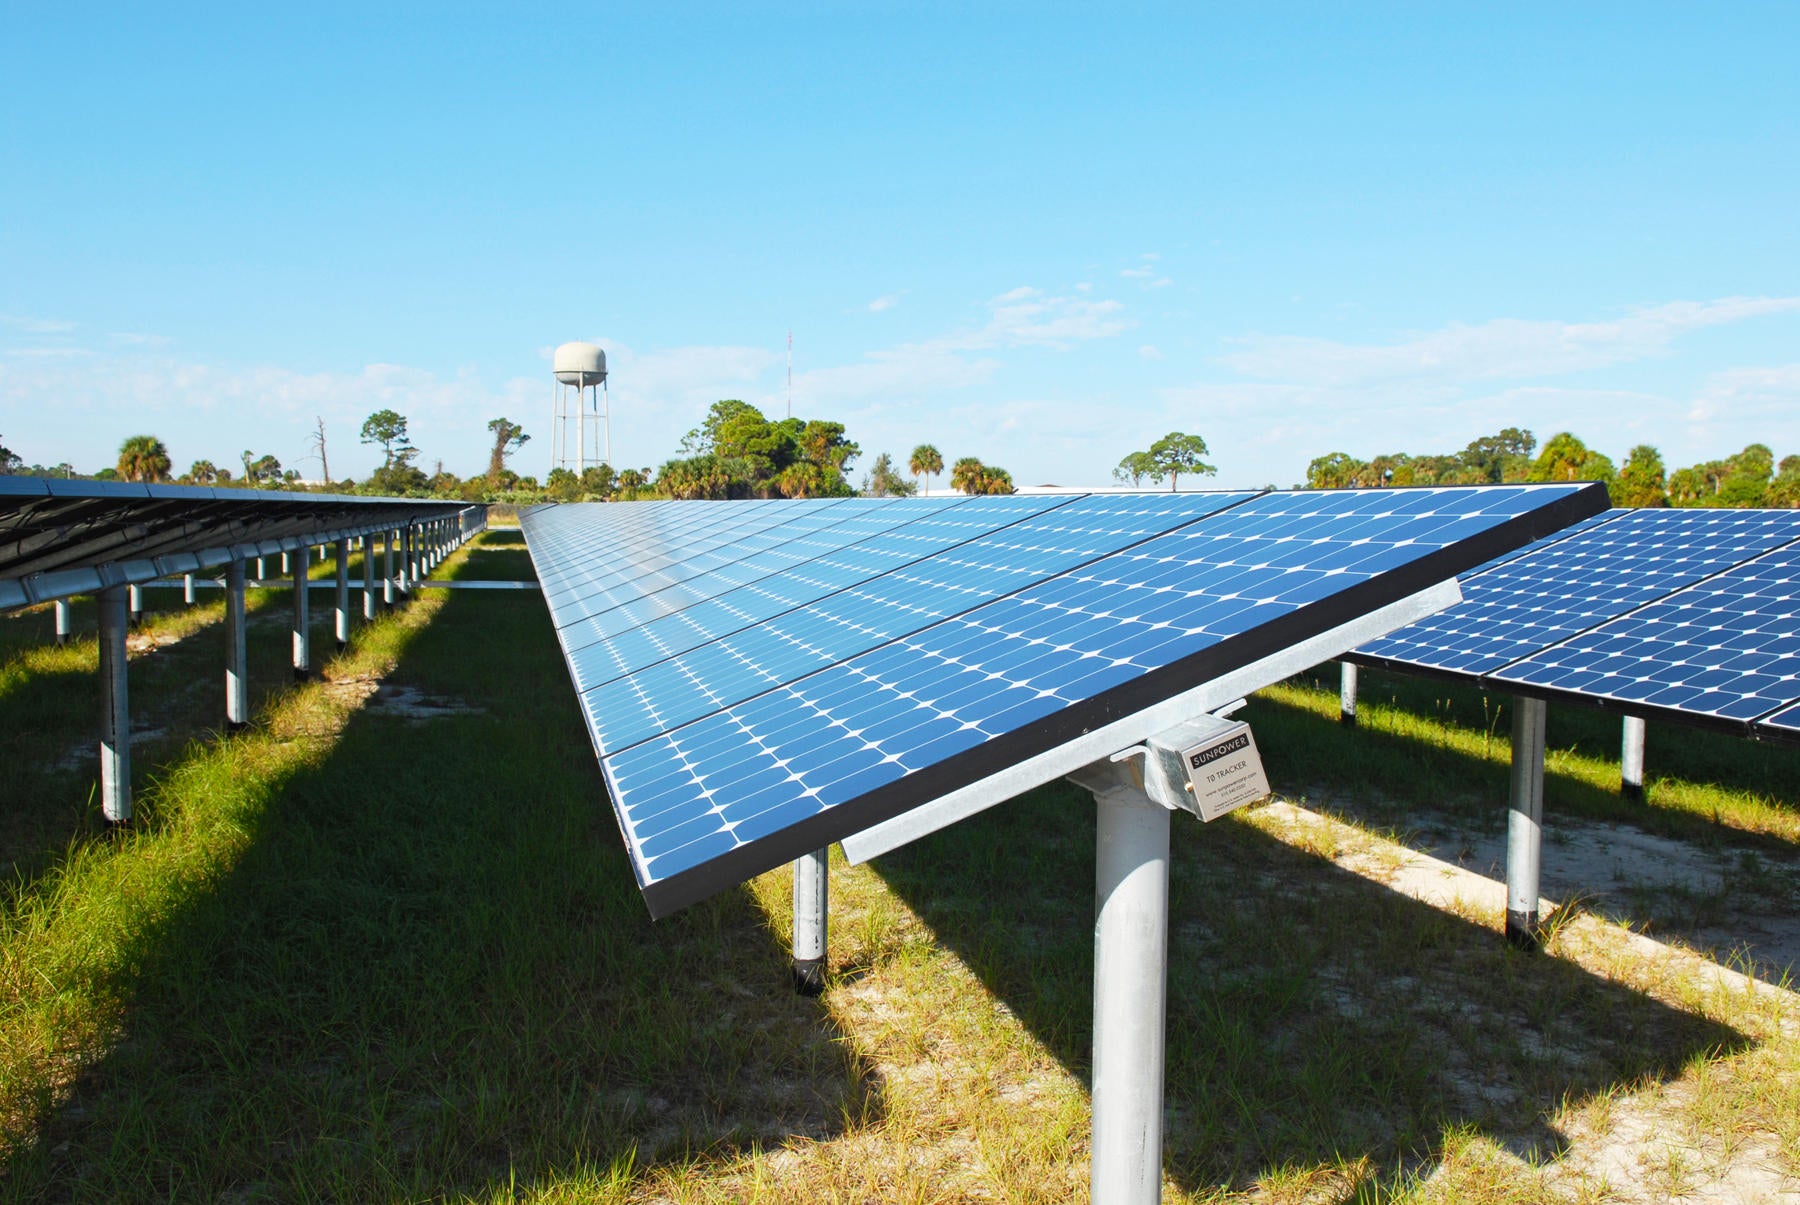 How to Maintain the Solar Photovoltaic Power Generation System